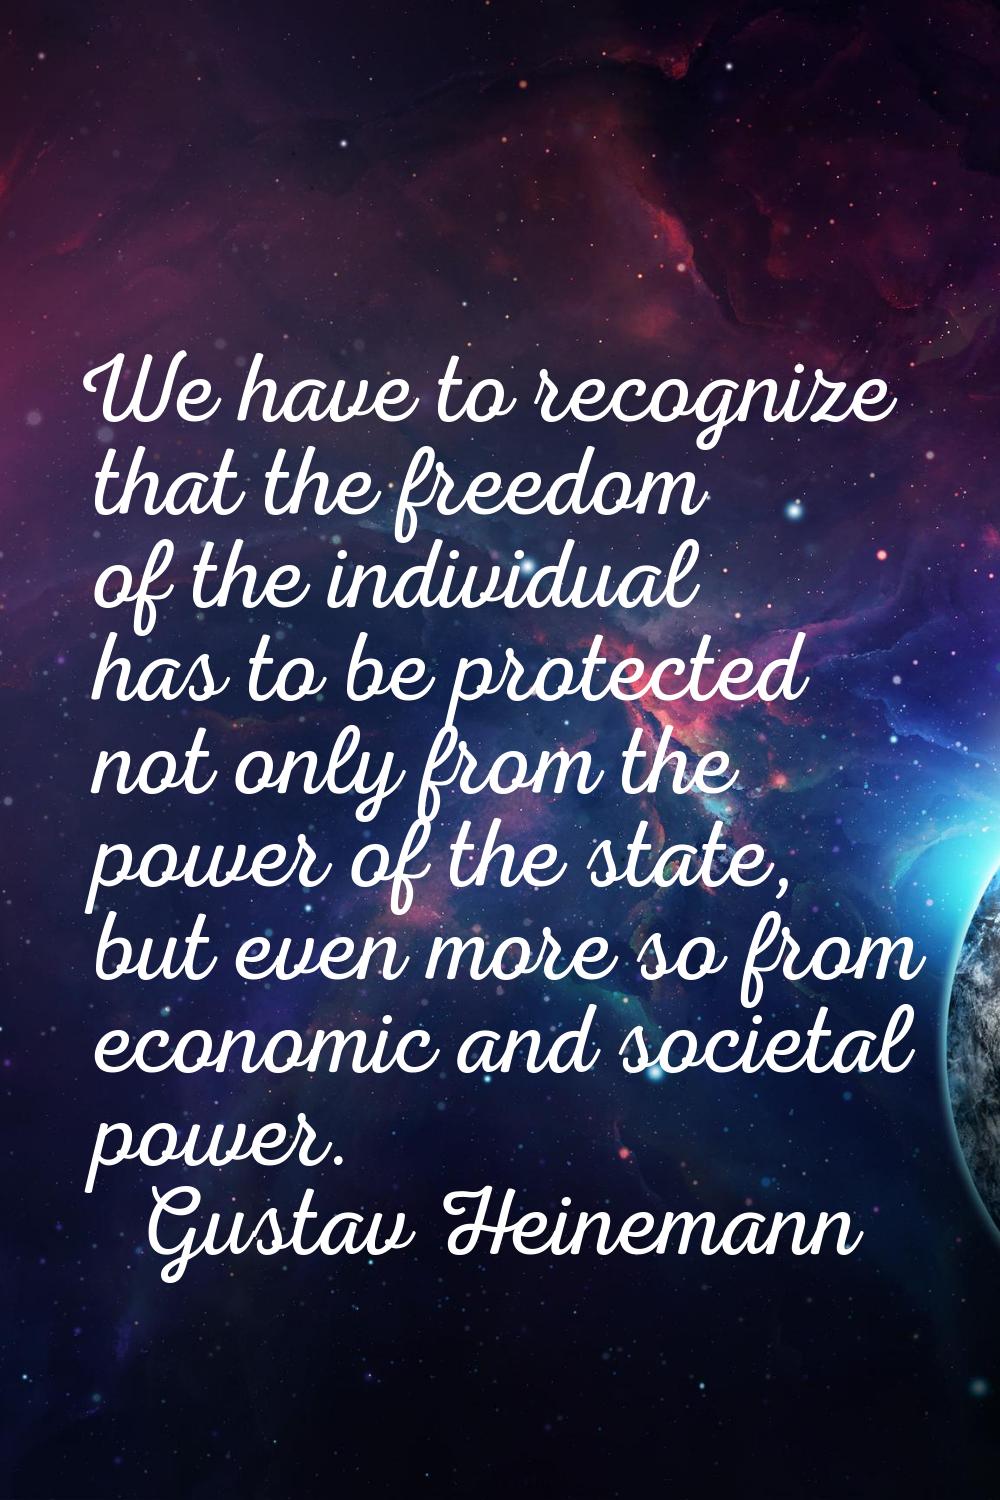 We have to recognize that the freedom of the individual has to be protected not only from the power